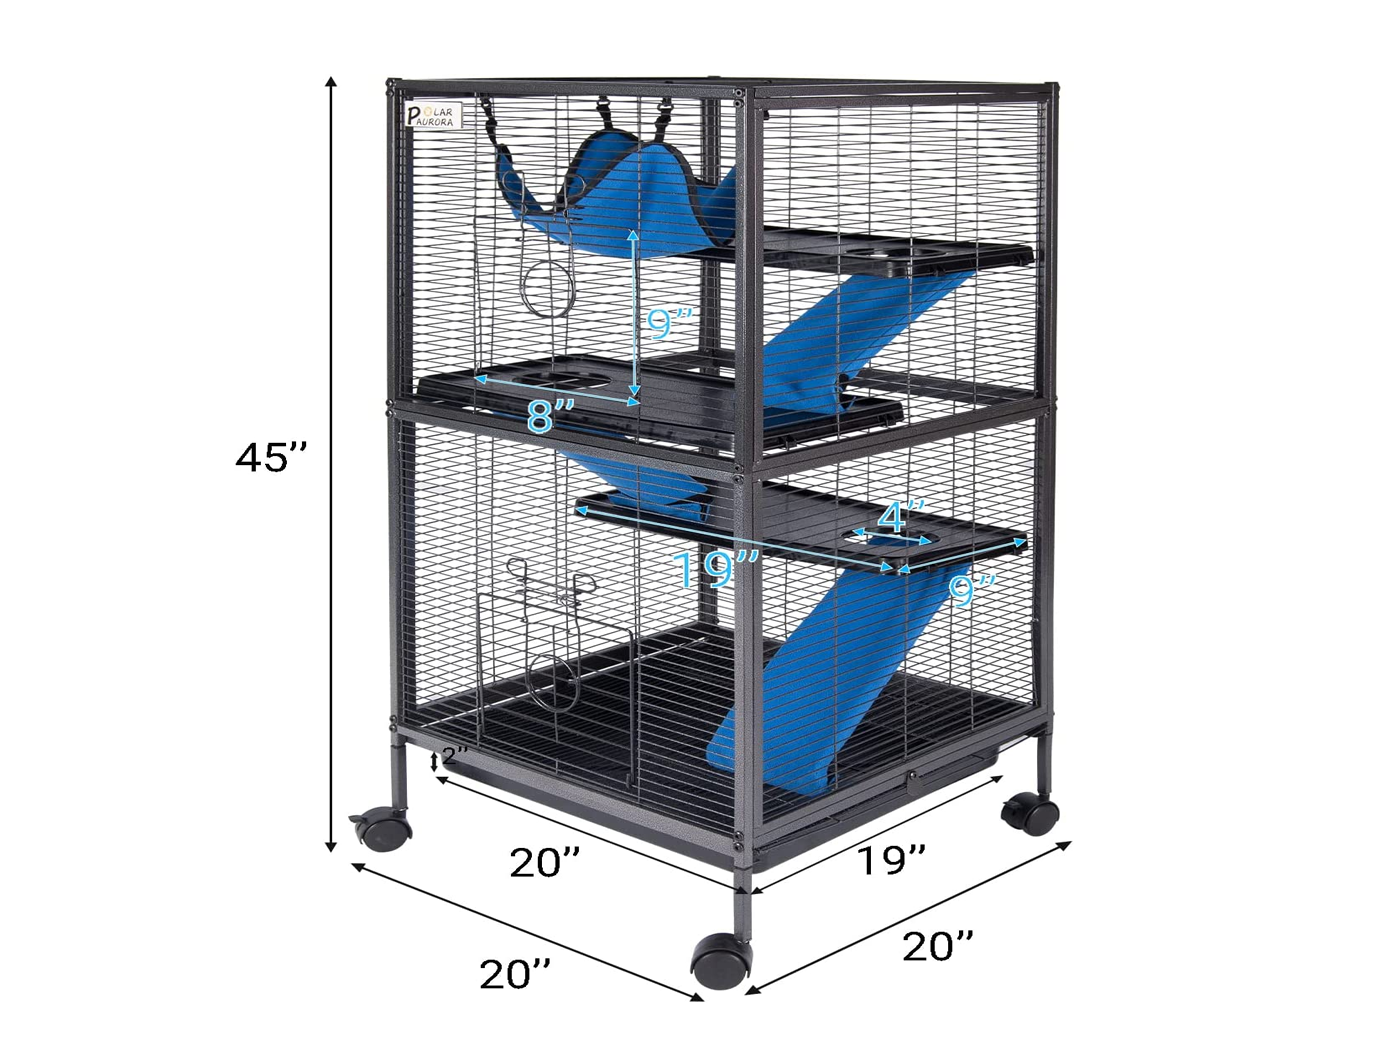 Small animal cages for guinea pigs, ferrets, etc. with tray removable